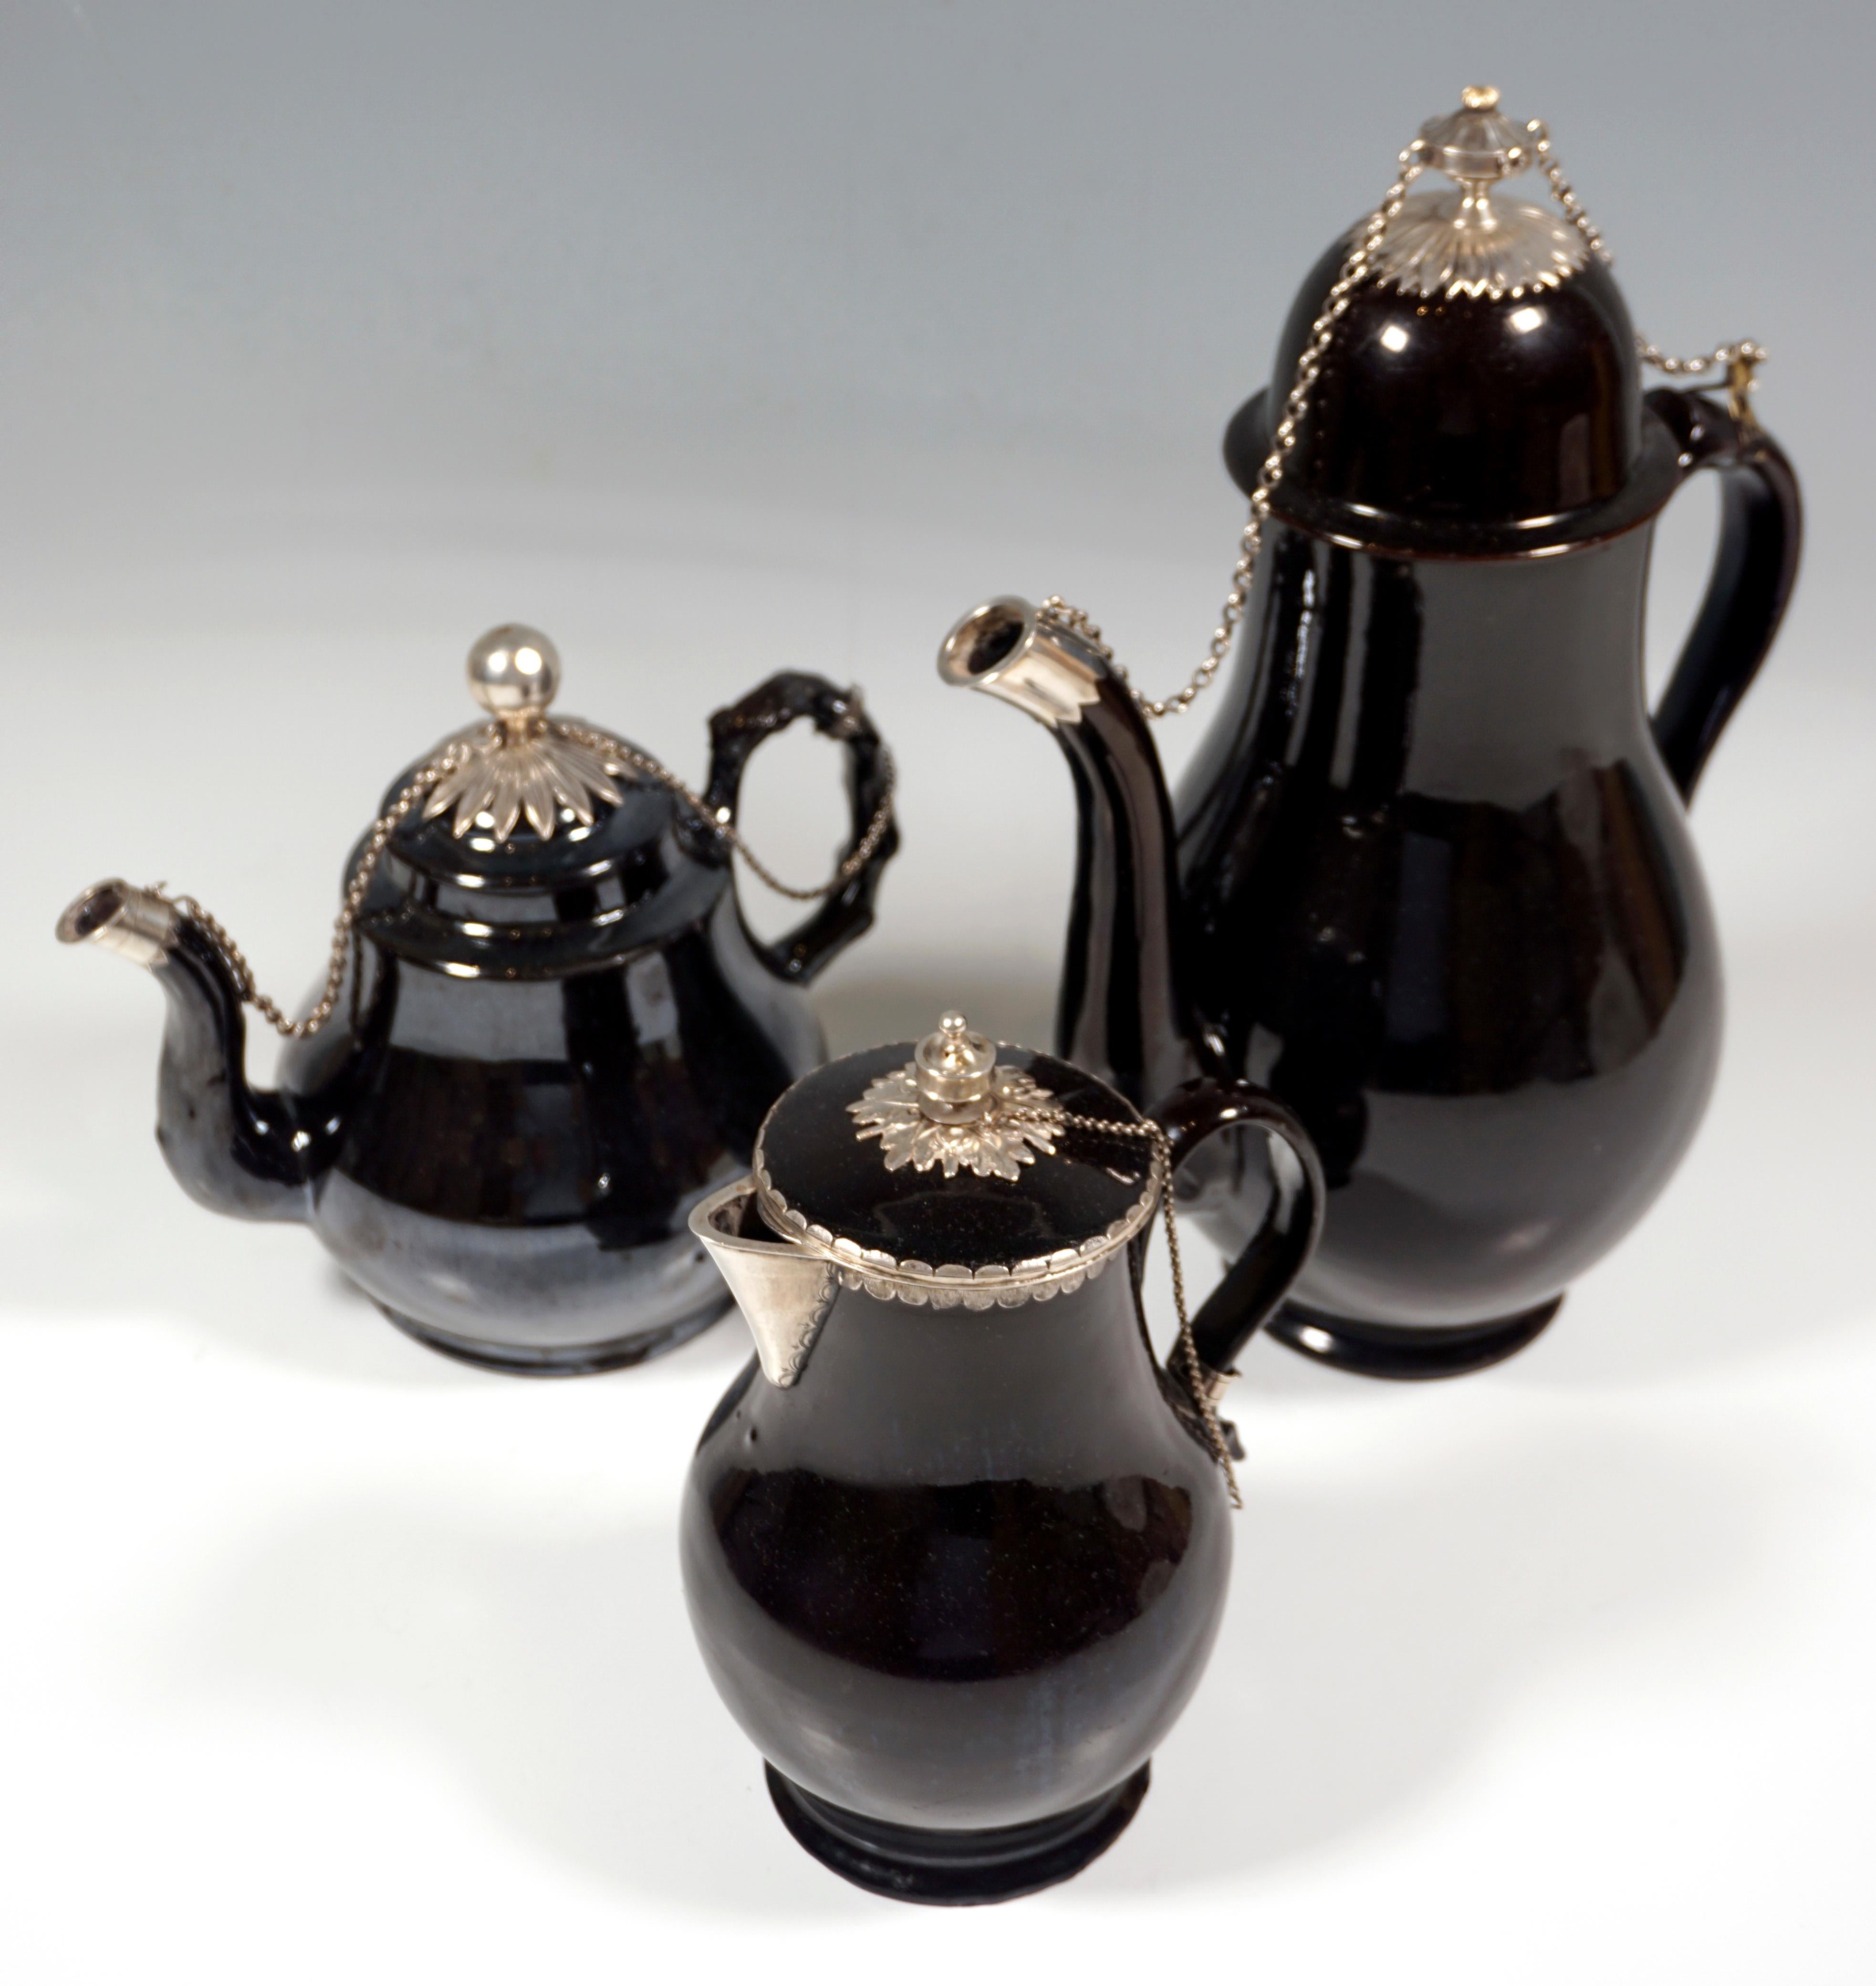 3-part core piece consisting of coffee pot, teapot and milk jug made of Terre de Namur ceramics.

Terre de Namur
The fine black faience is a particular product of Namur, Belgium, late 18th century. It is a red-brown, very dark, almost black clay